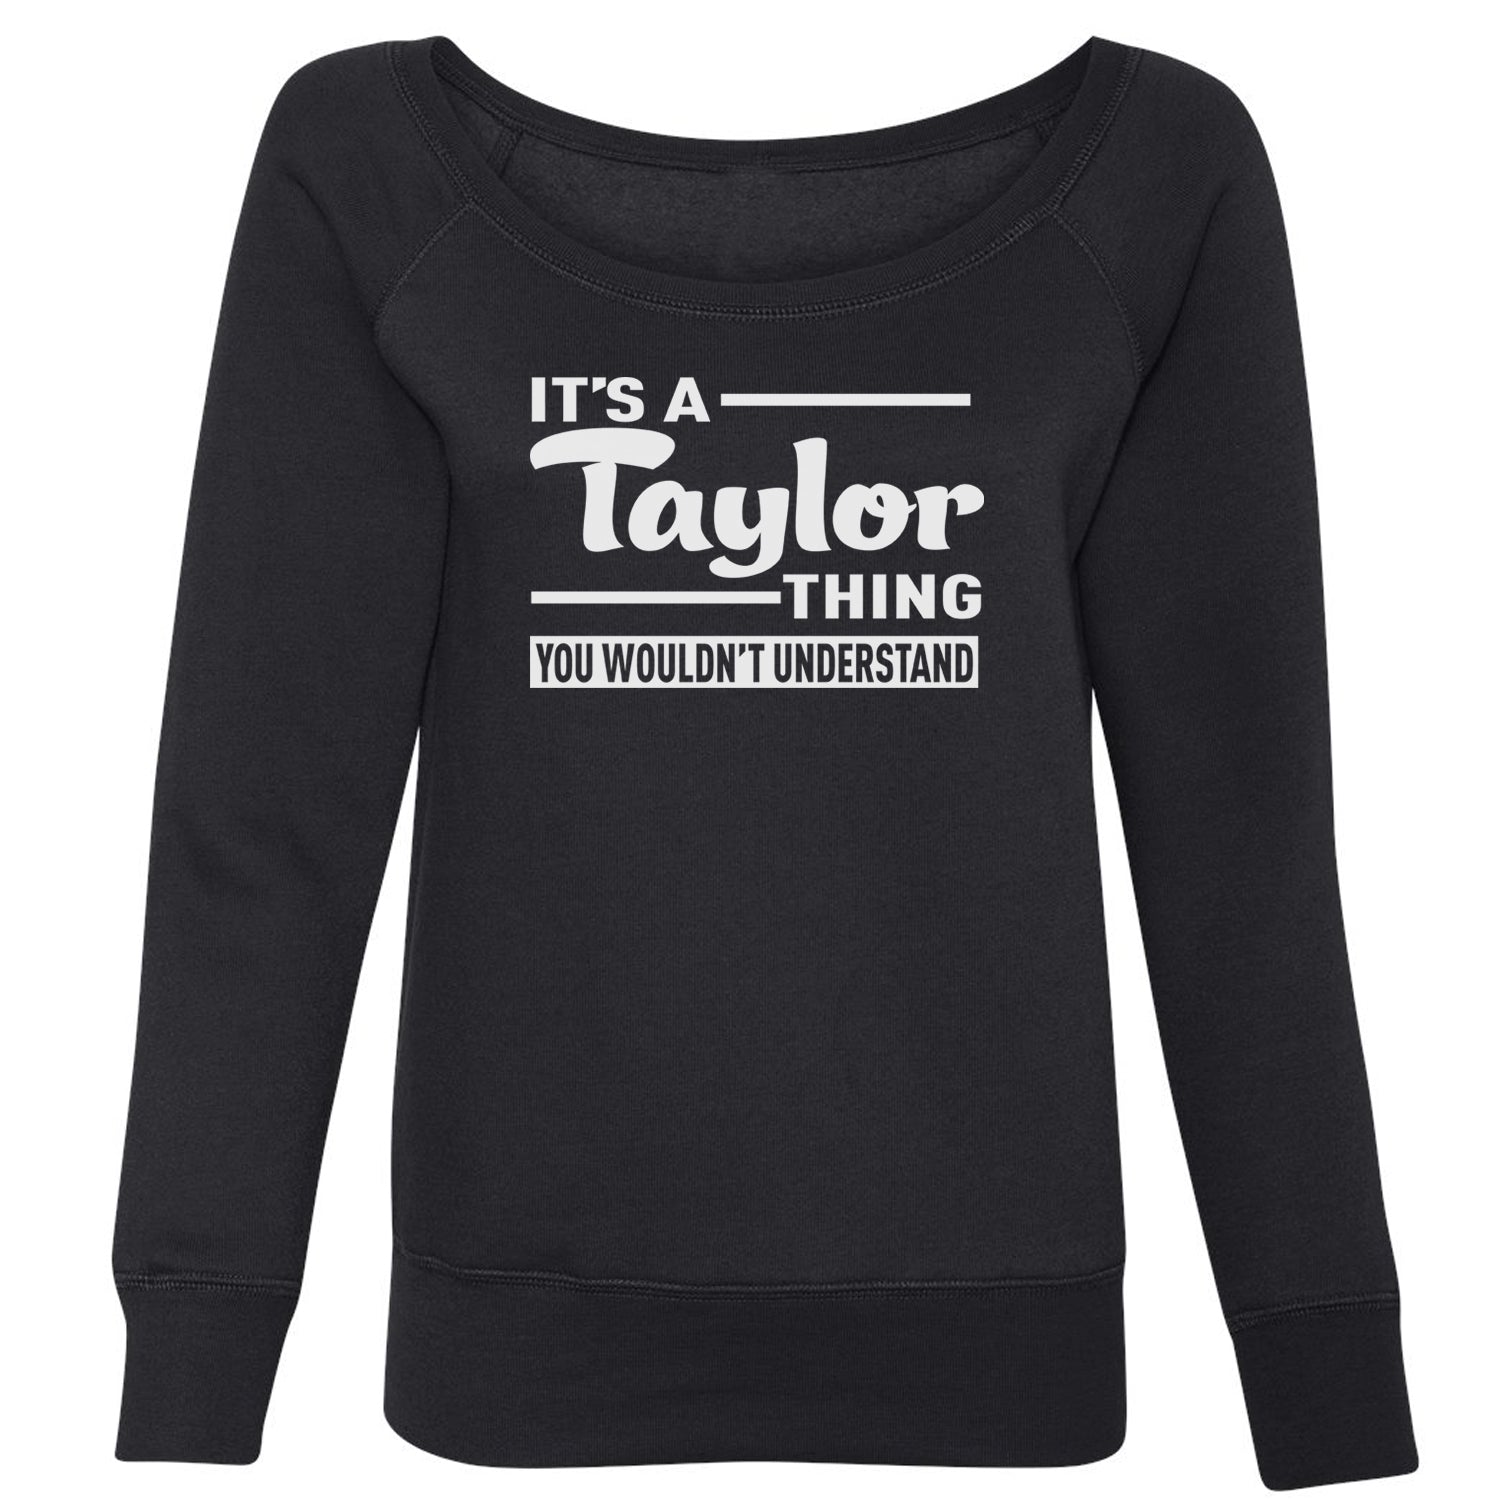 It's A Taylor Thing, You Wouldn't Understand Slouchy Off Shoulder Oversized Sweatshirt nation, taylornation by Expression Tees